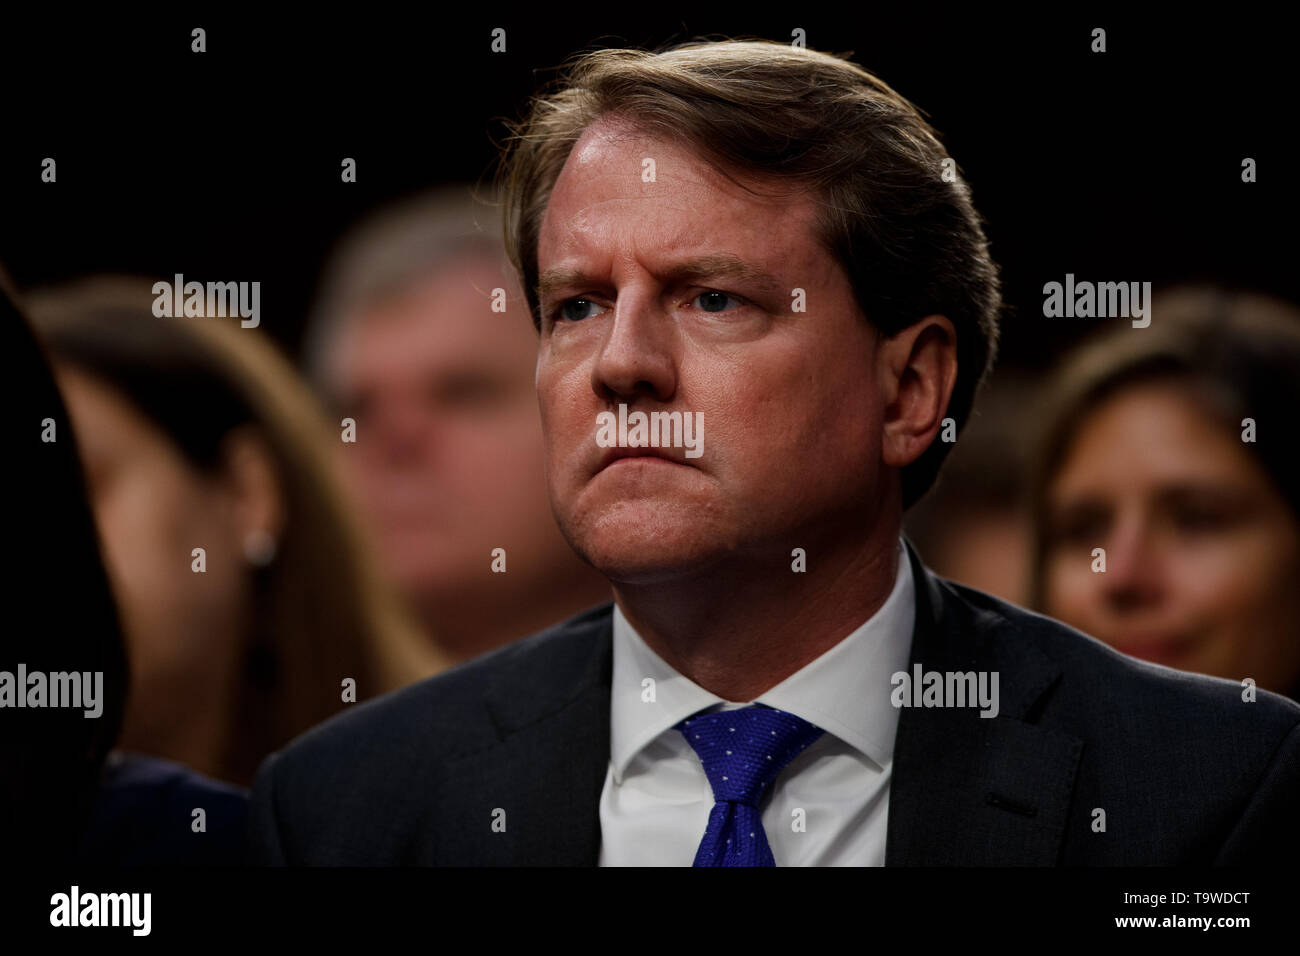 Washington, DC, USA. 4th Sep, 2018. Then White House counsel Don McGahn reacts in the audience during the confirmation hearing for Supreme Court Justice nominee Brett Kavanaugh before the U.S. Senate Judiciary Committee on Capitol Hill in Washington, DC, the United States, on Sept. 4, 2018. The White House on Monday instructed former counsel Don McGahn to defy a congressional subpoena and skip a hearing scheduled for Tuesday relating to the Russia probe. Credit: Ting Shen/Xinhua/Alamy Live News Stock Photo